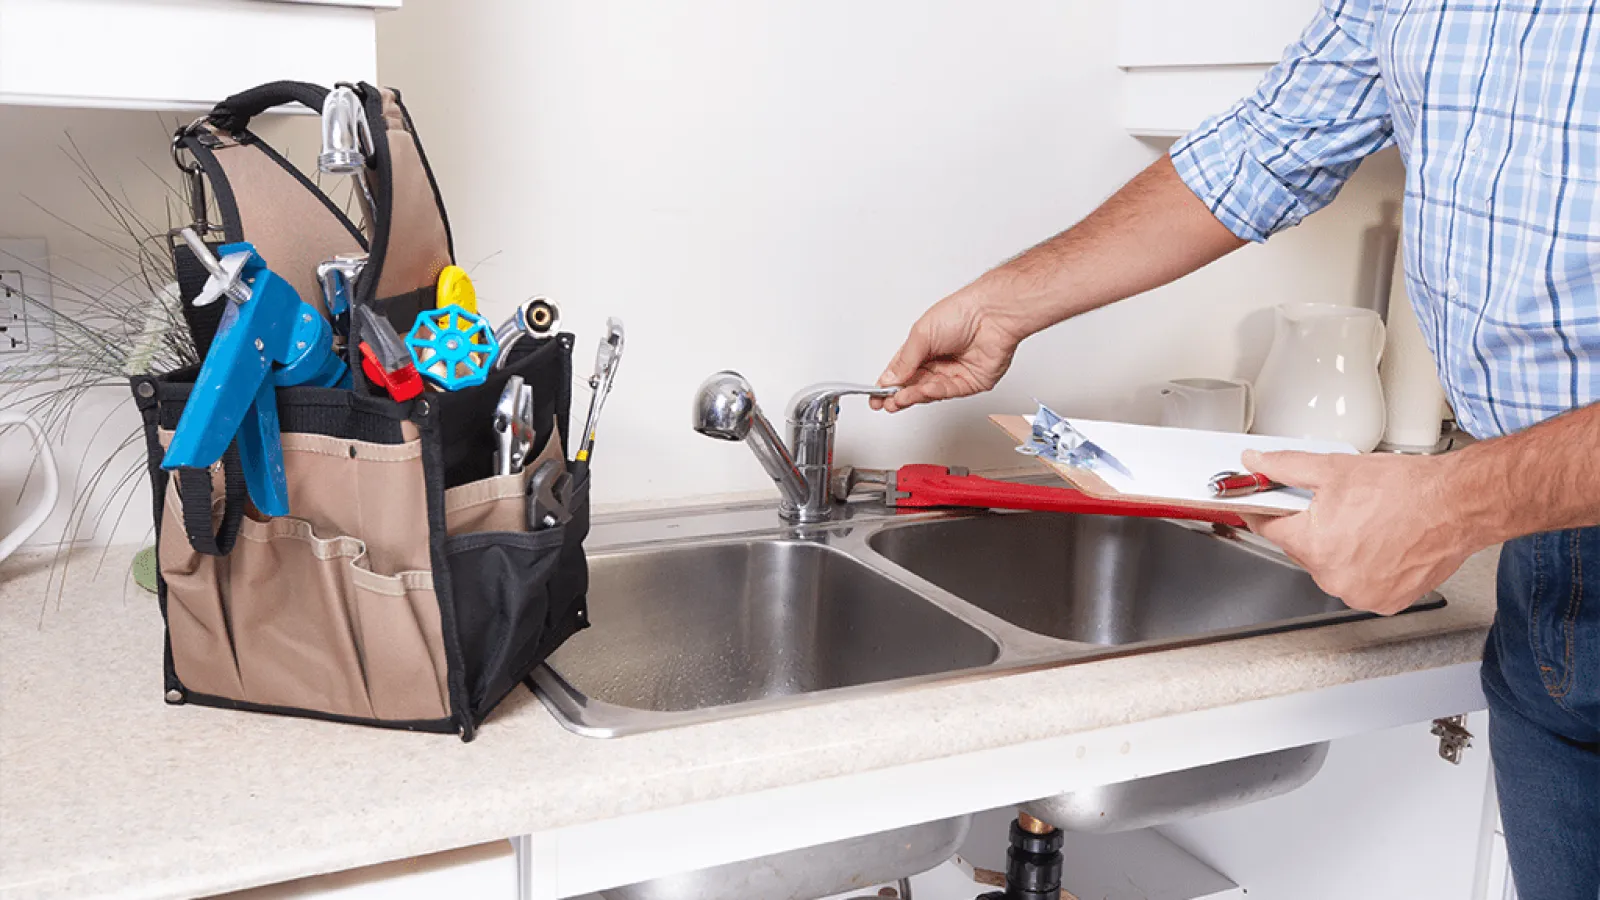 Here’s What You Need to Know About Emergency Plumbing During the Holidays